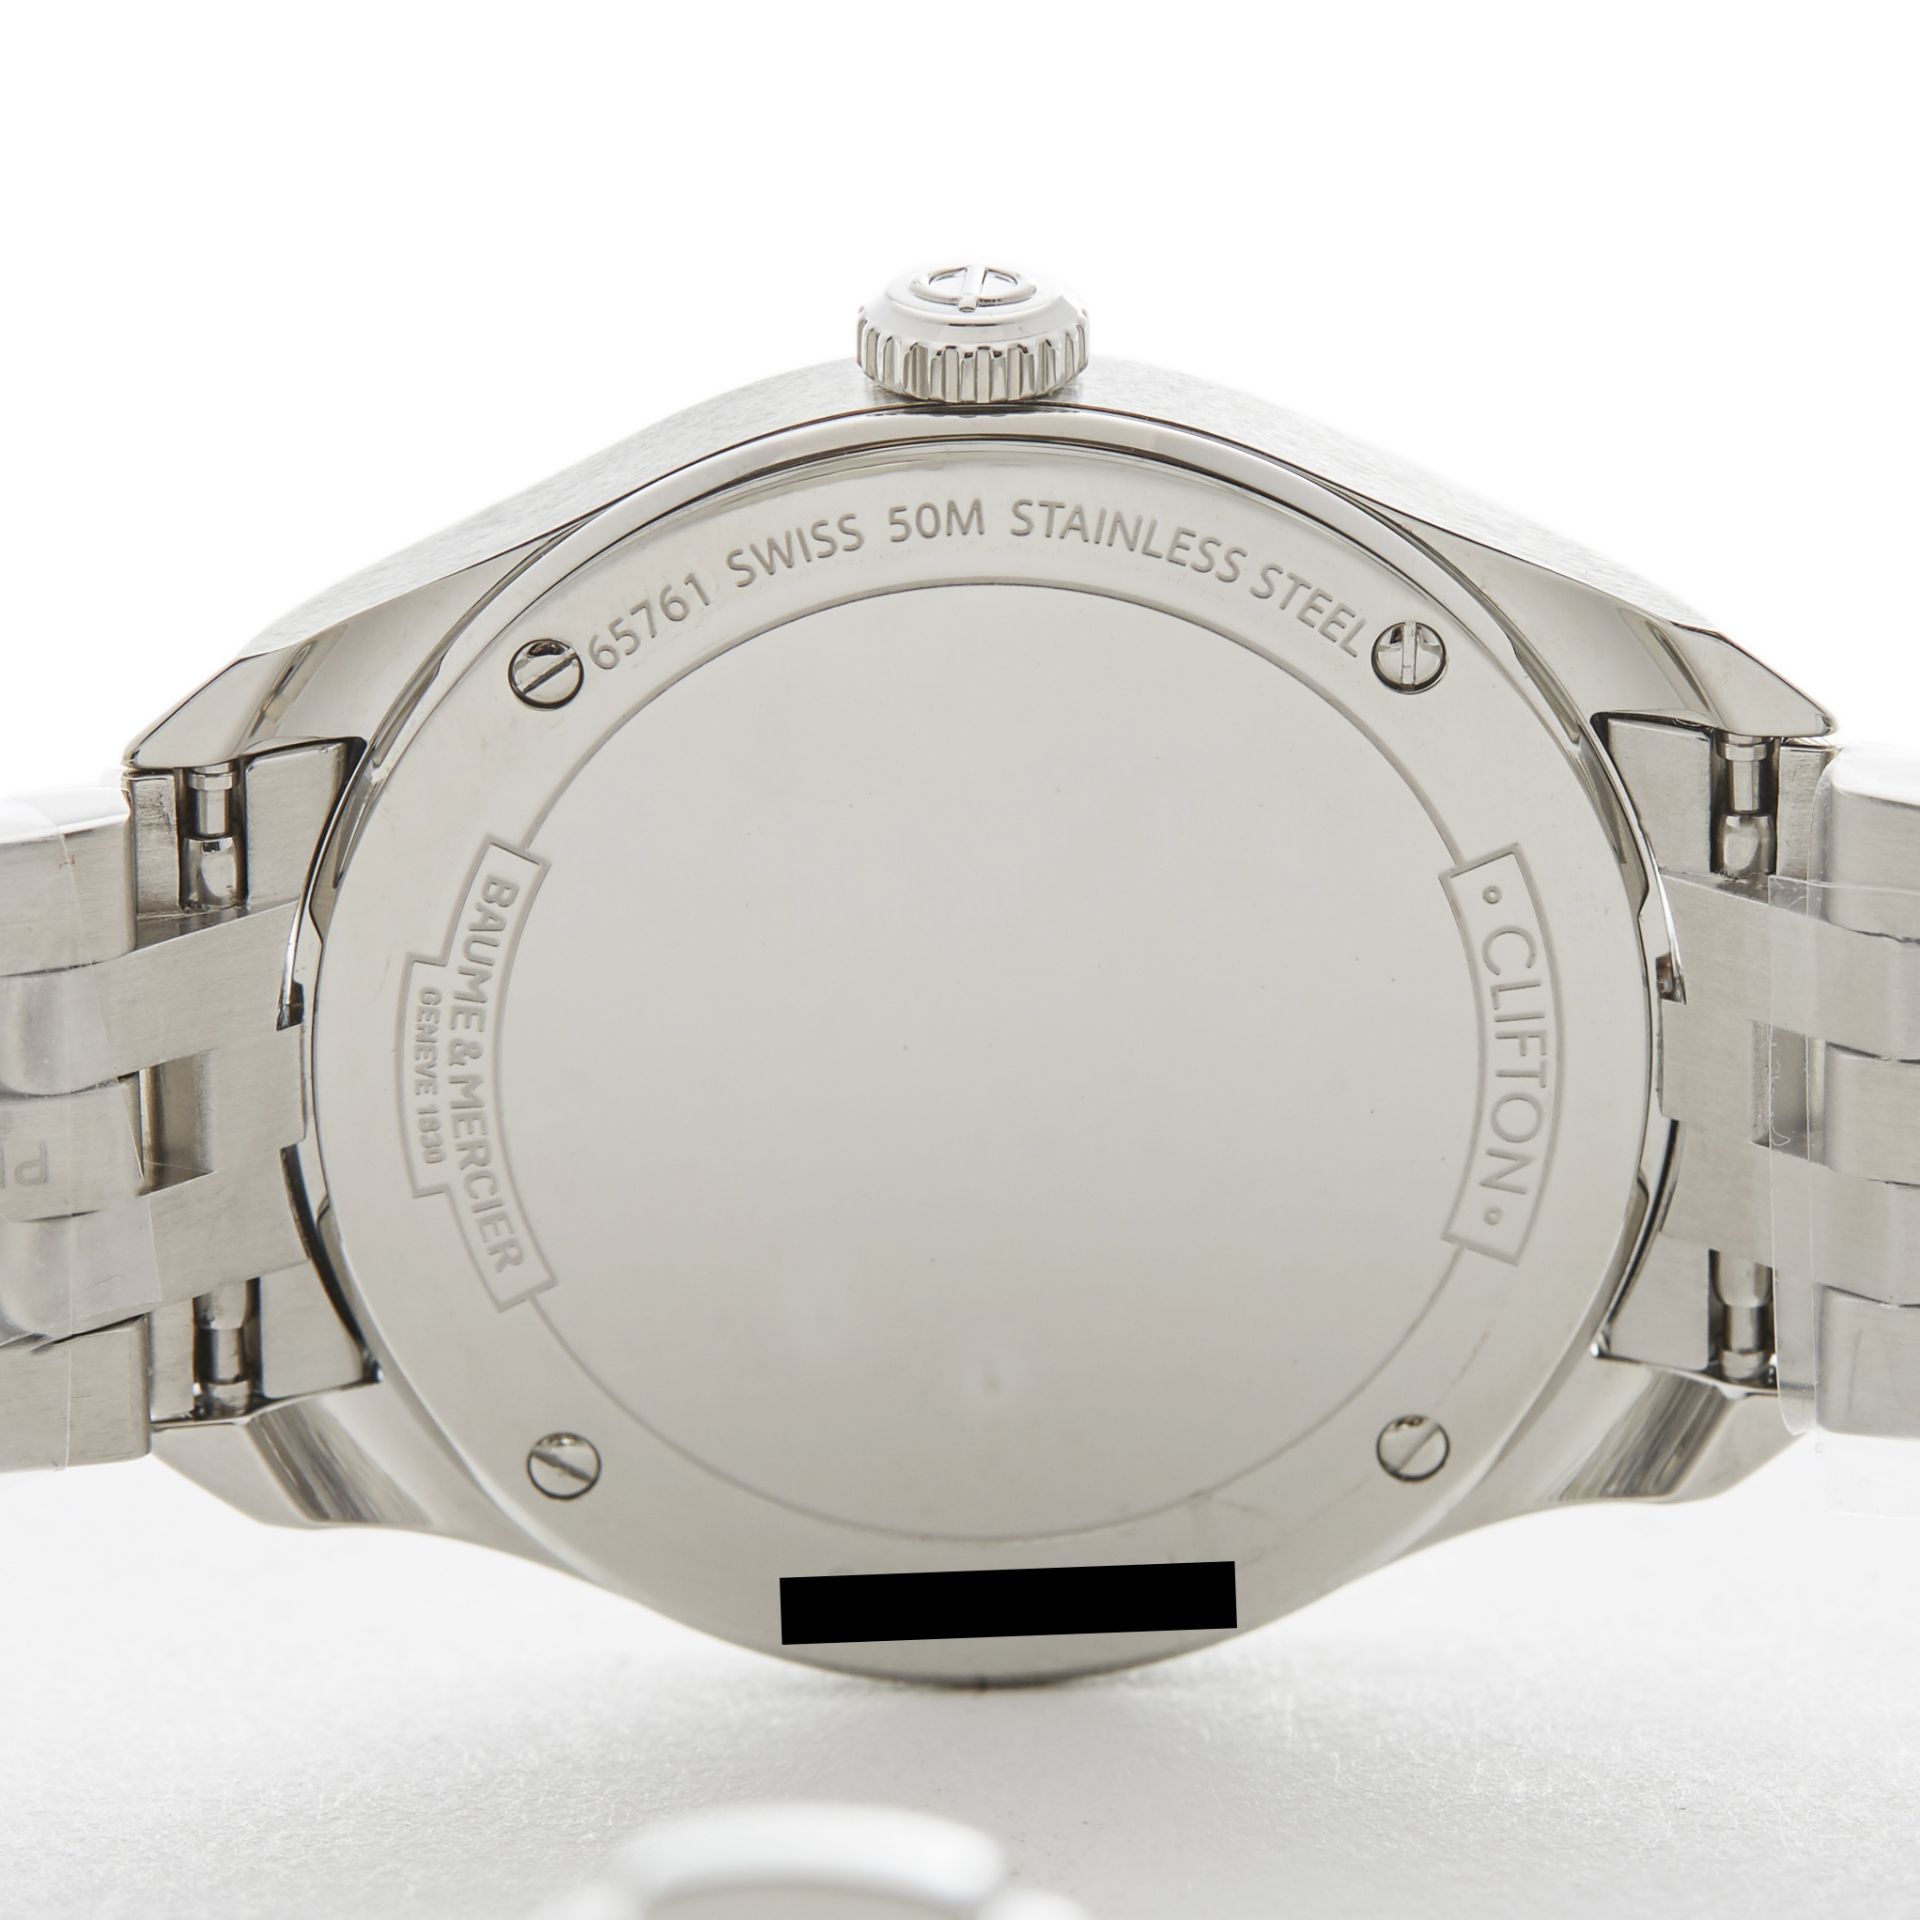 Baume & Mercier, Clifton 30mm Stainless Steel M0A10209 - Image 8 of 8